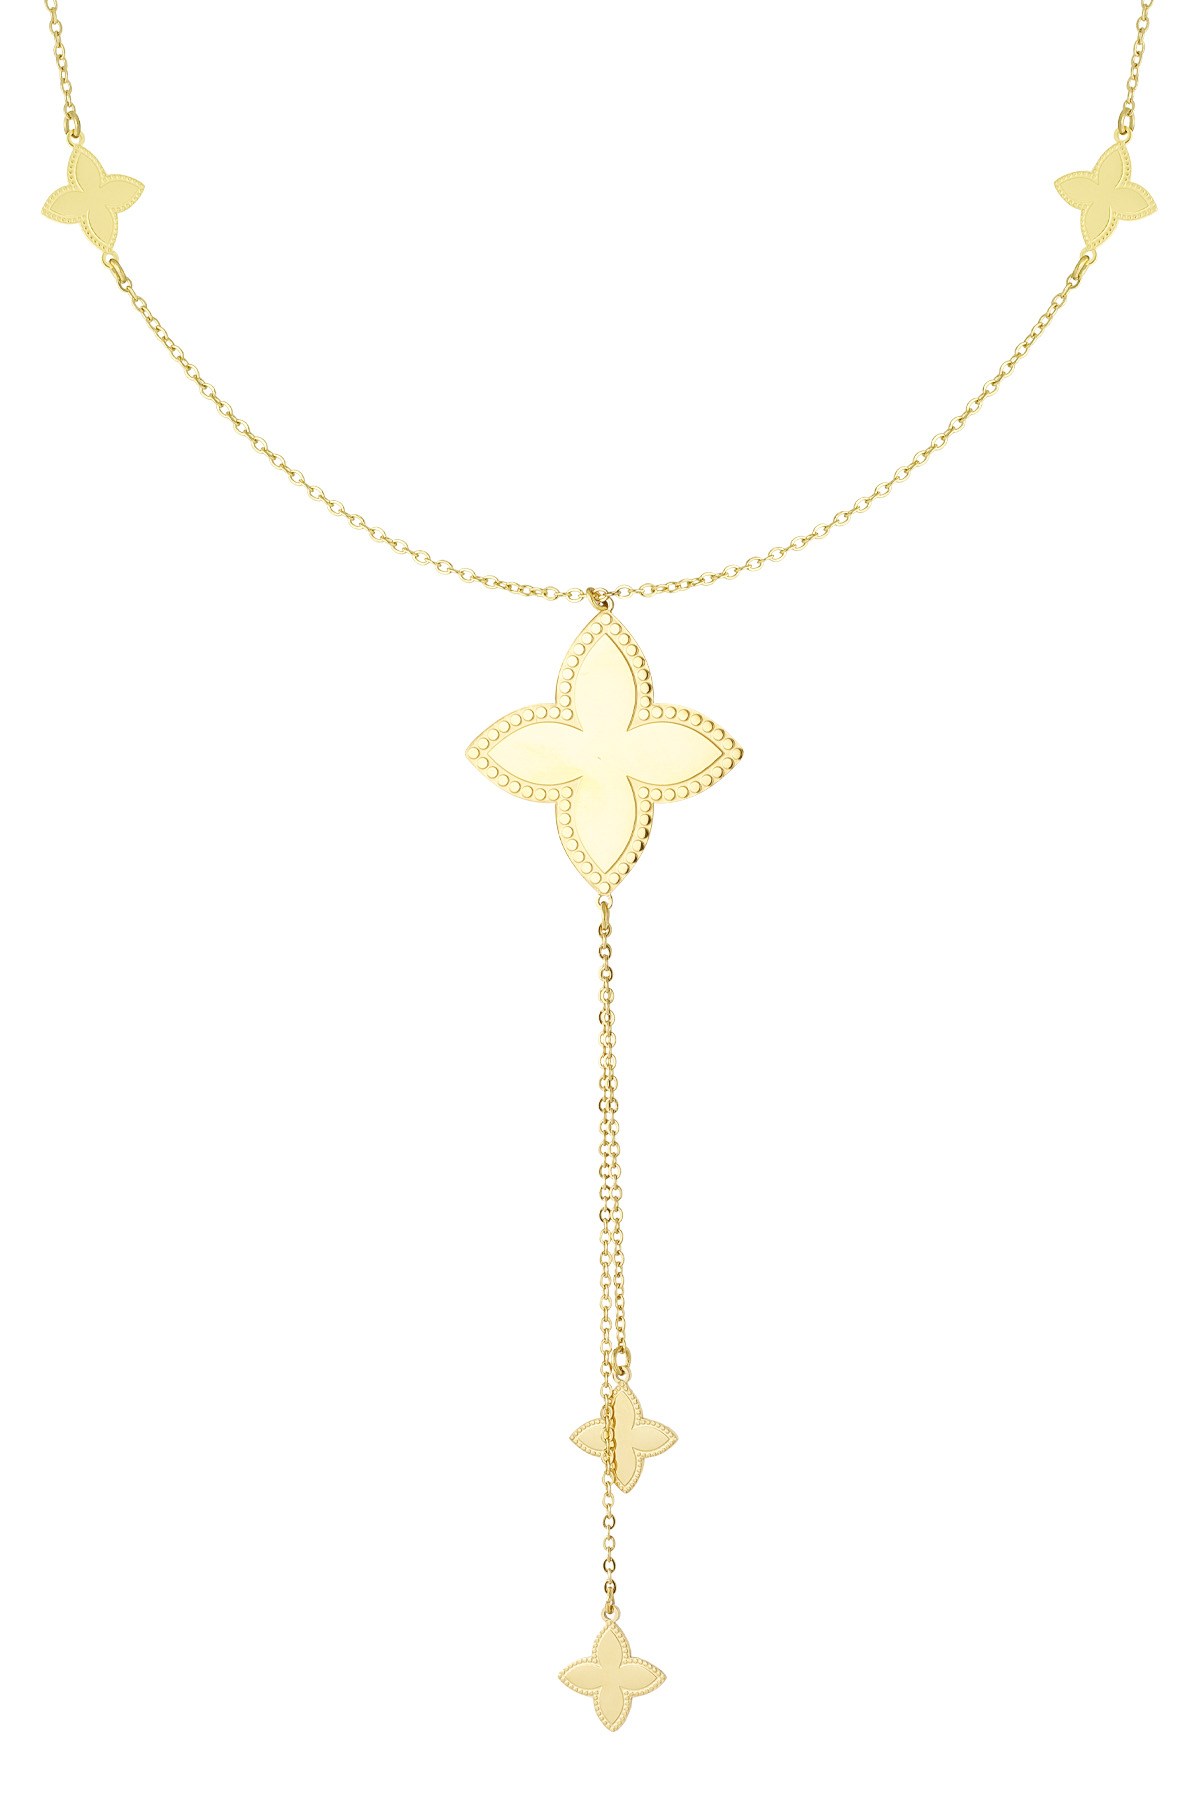 Long necklace with various clover charms - gold  h5 